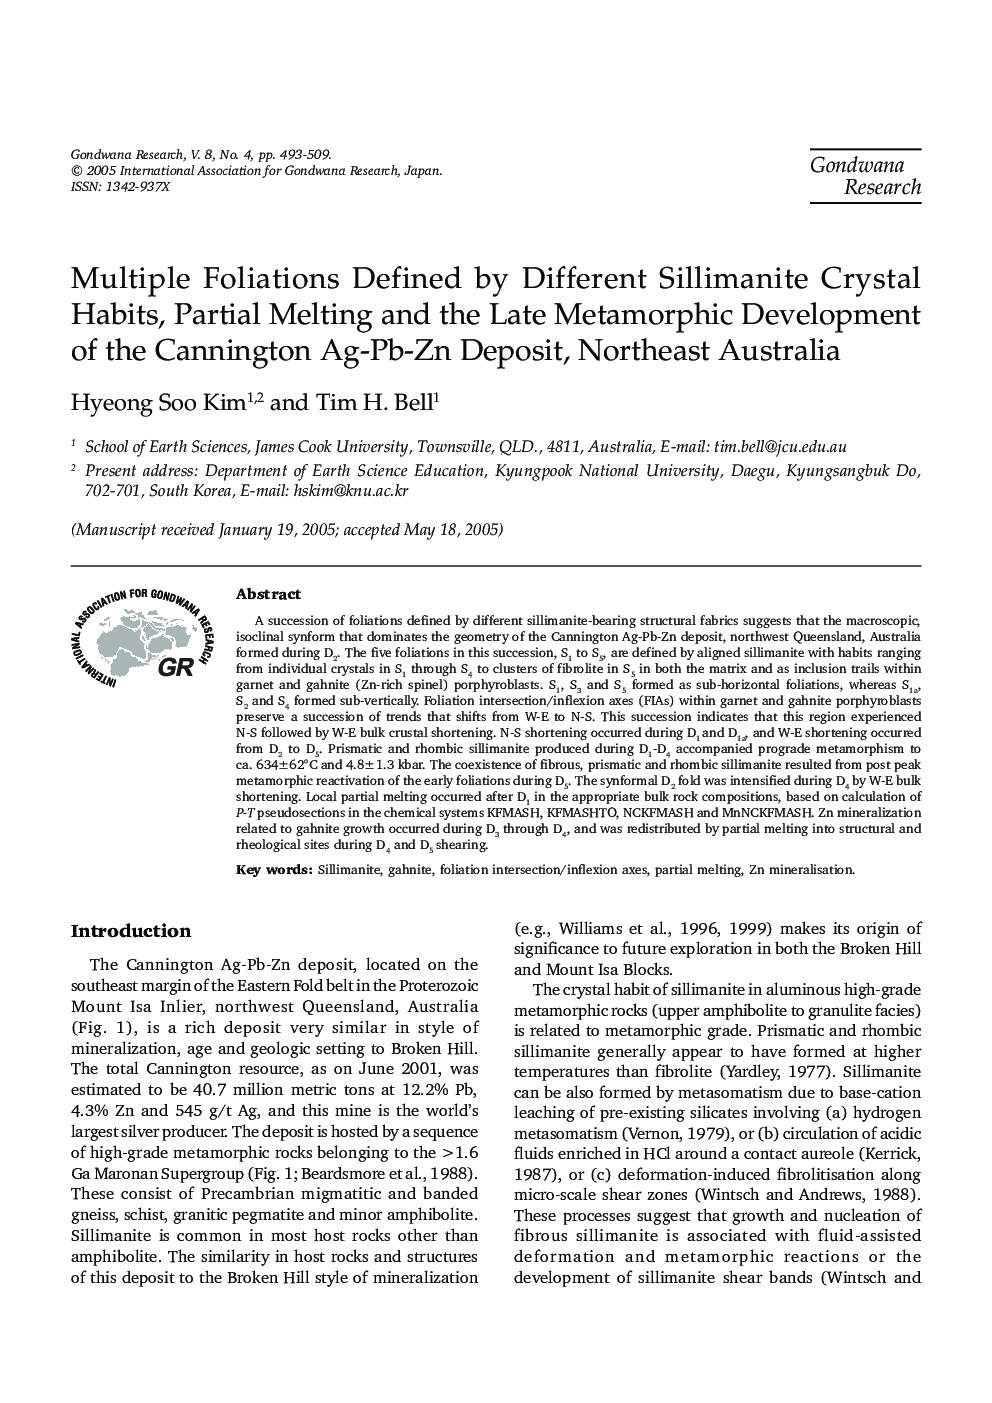 Multiple Foliations Defined by Different Sillimanite Crystal Habits, Partial Melting and the Late Metamorphic Development of the Cannington Ag-Pb-Zn Deposit, Northeast Australia